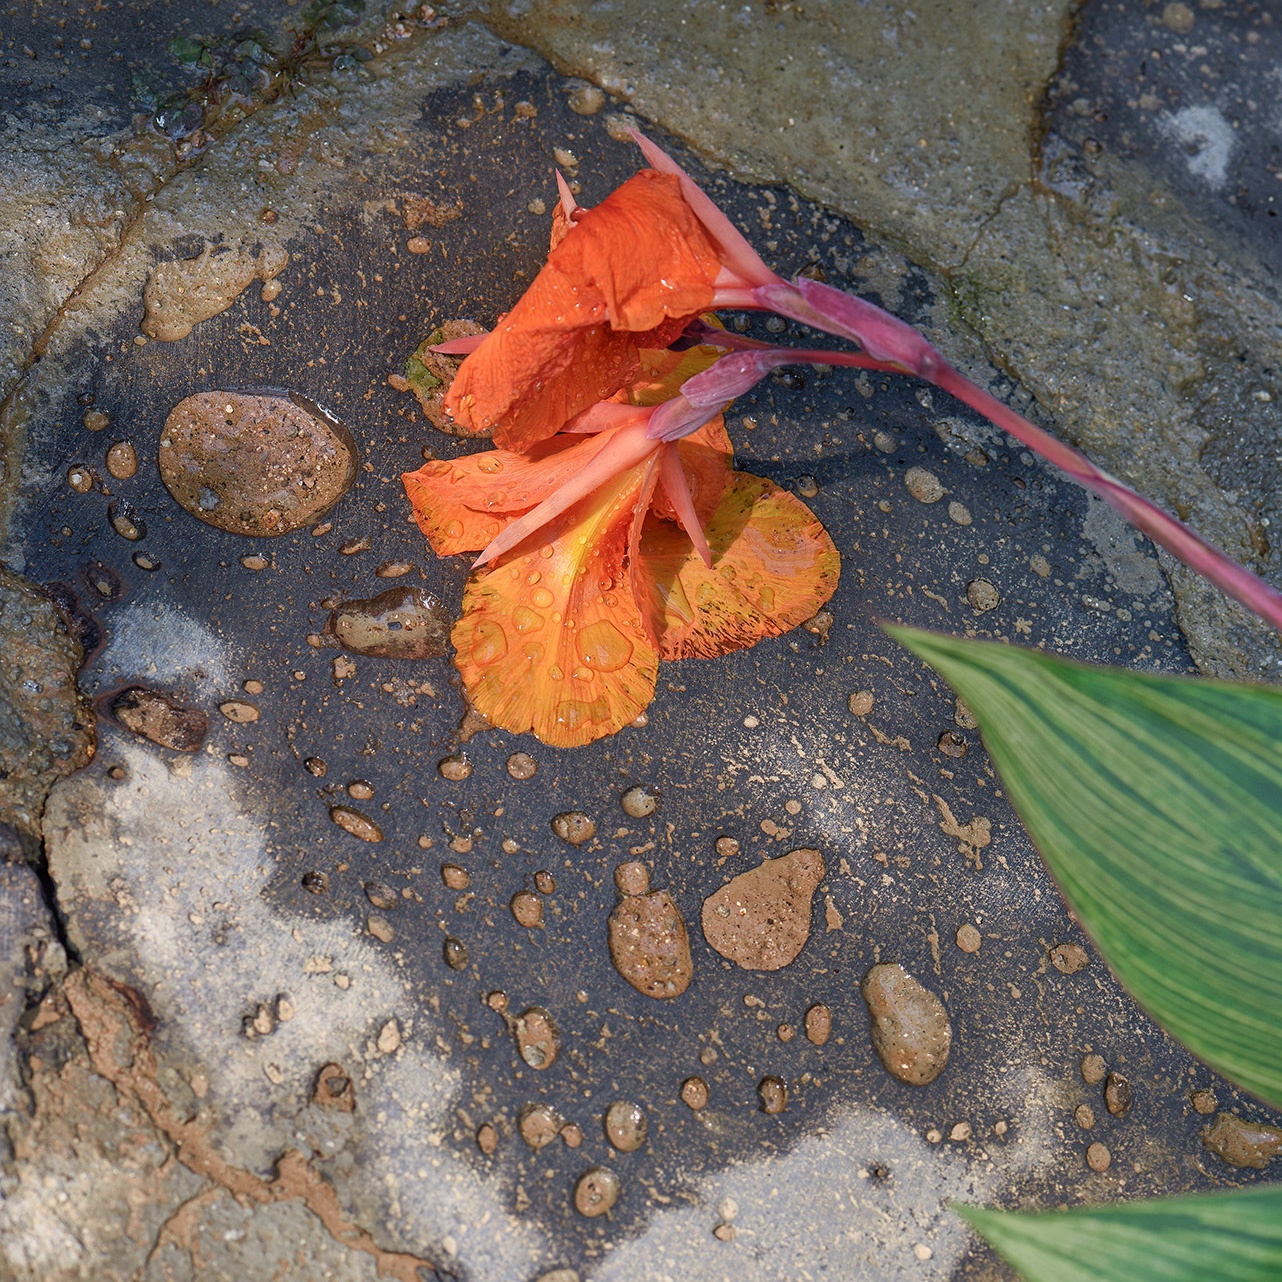 Orange flower covered with water droplets, on a wet brown rock.